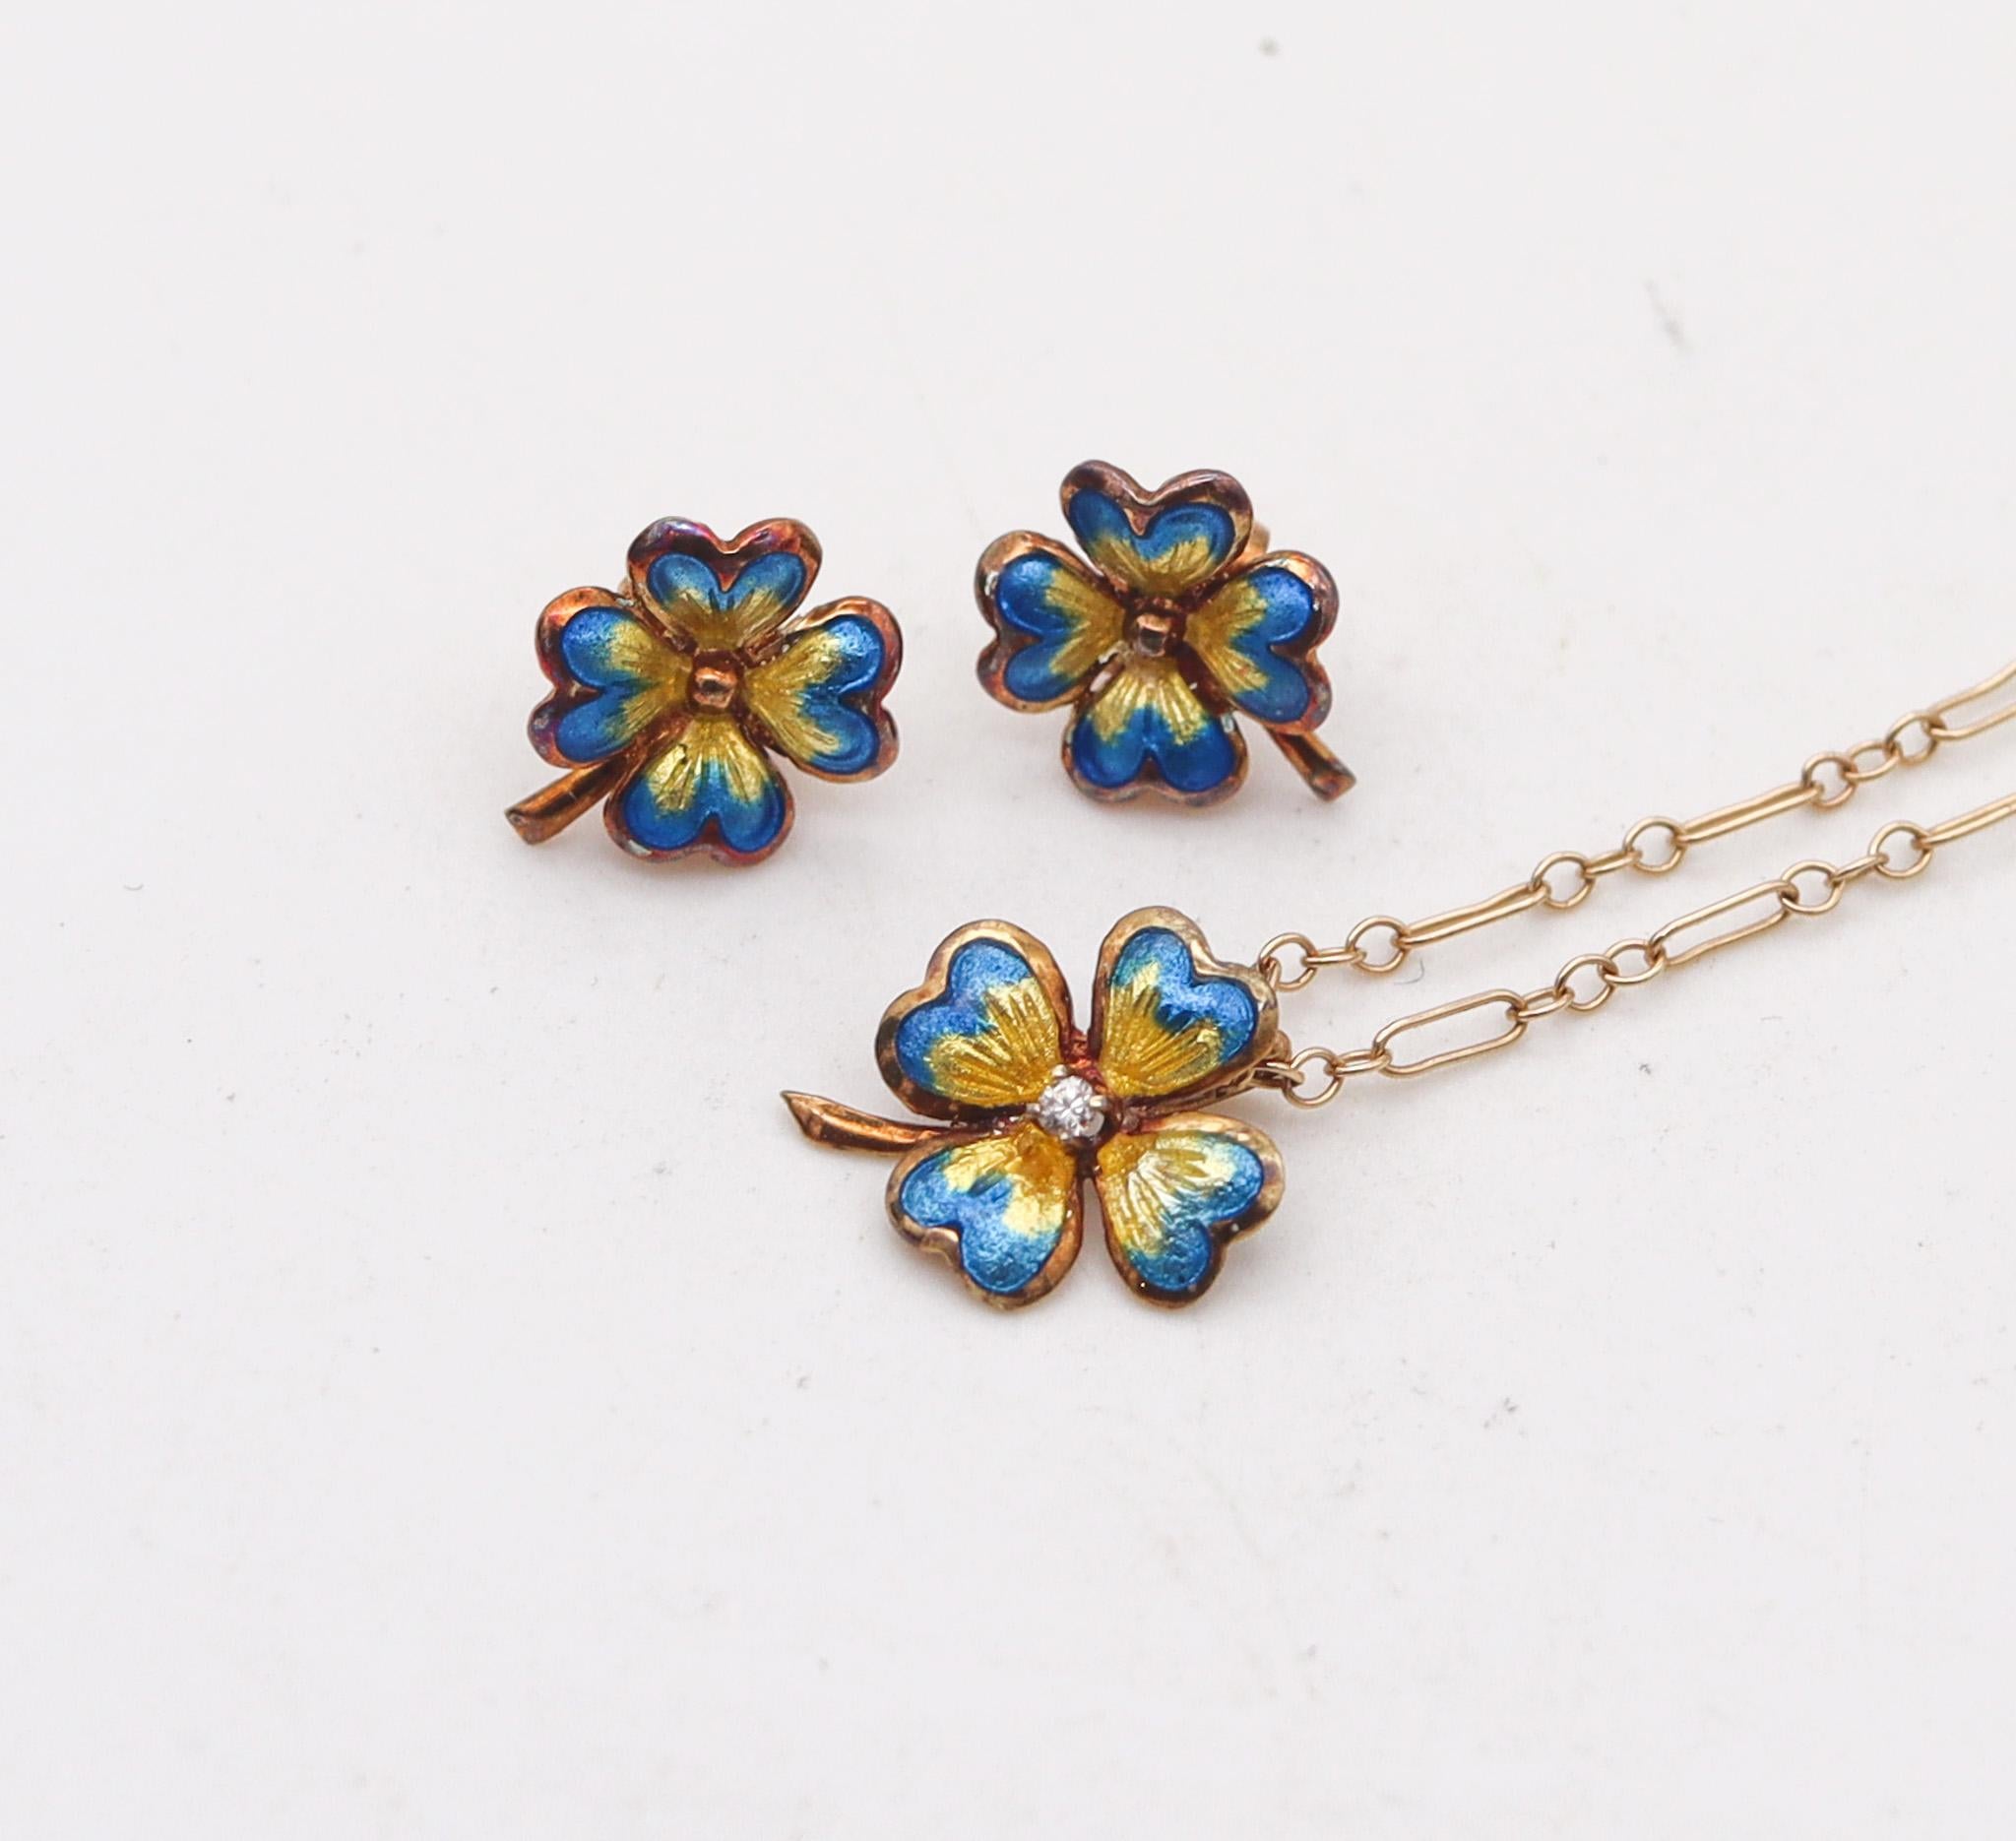 Brilliant Cut Edwardian 1905 Enameled Flowers Set Pendant And Stud Earrings In 14Kt Gold For Sale